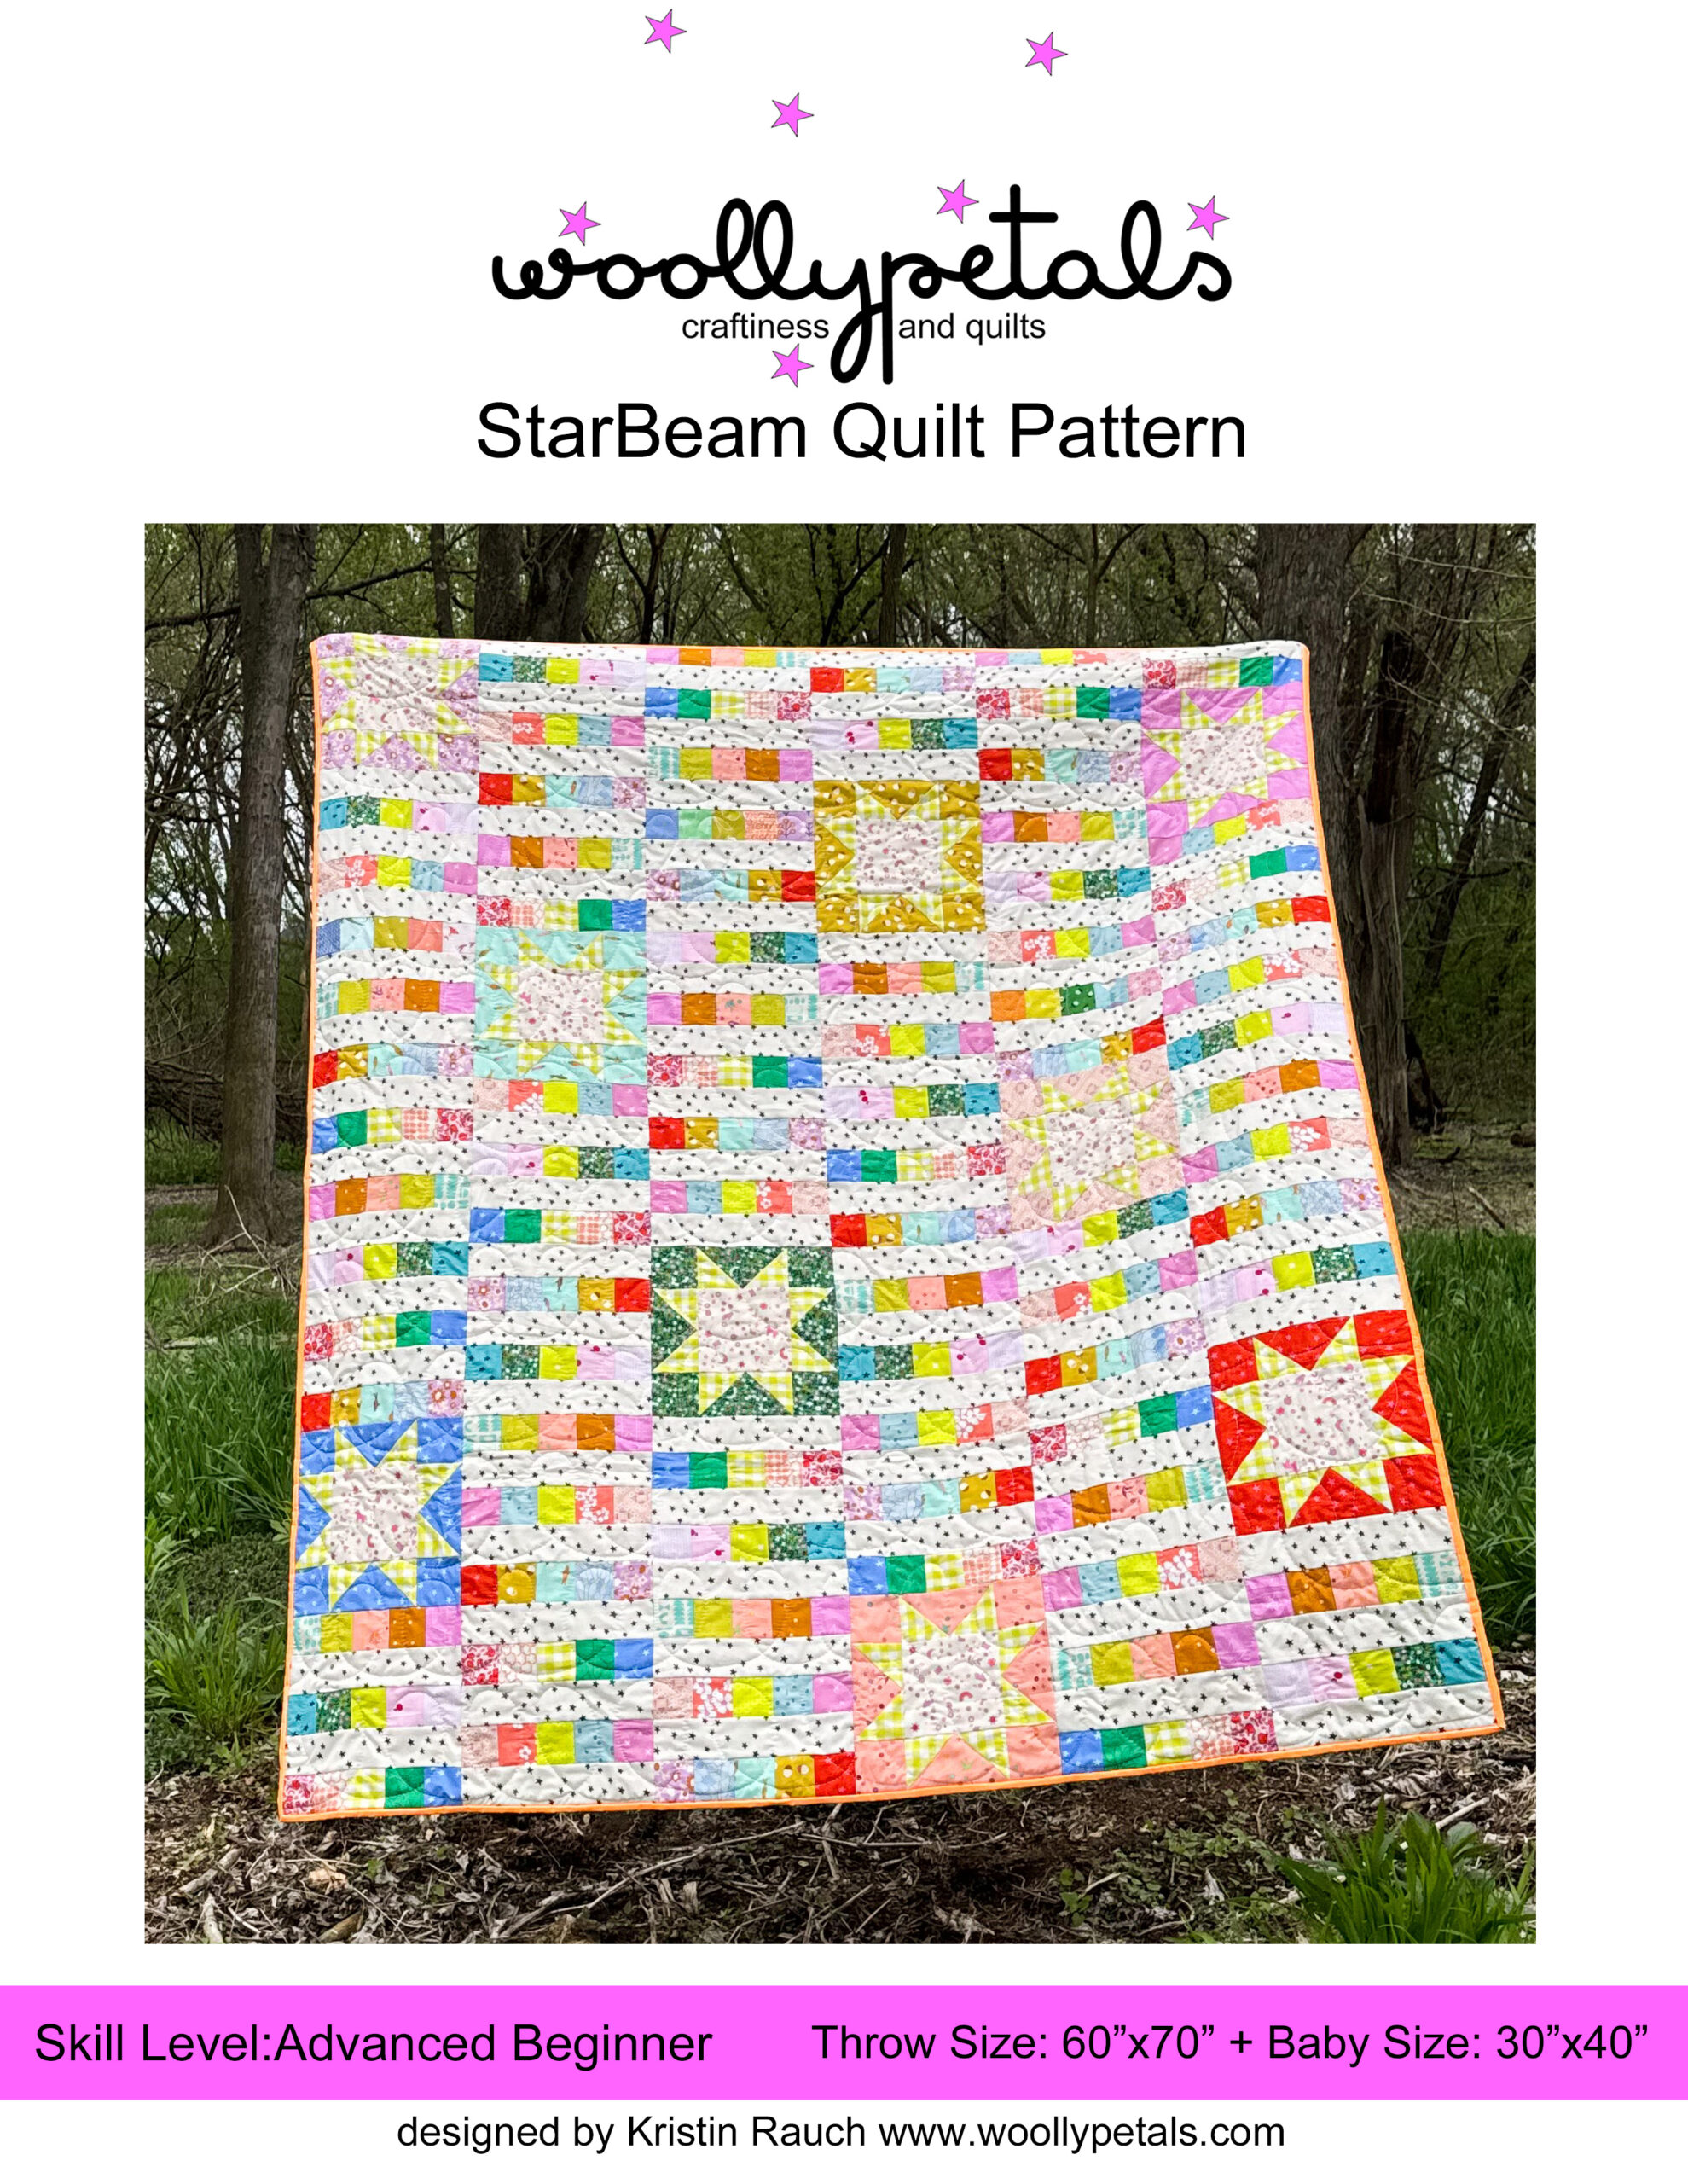 StarBeam Quilt Pattern Cover by woollypetals